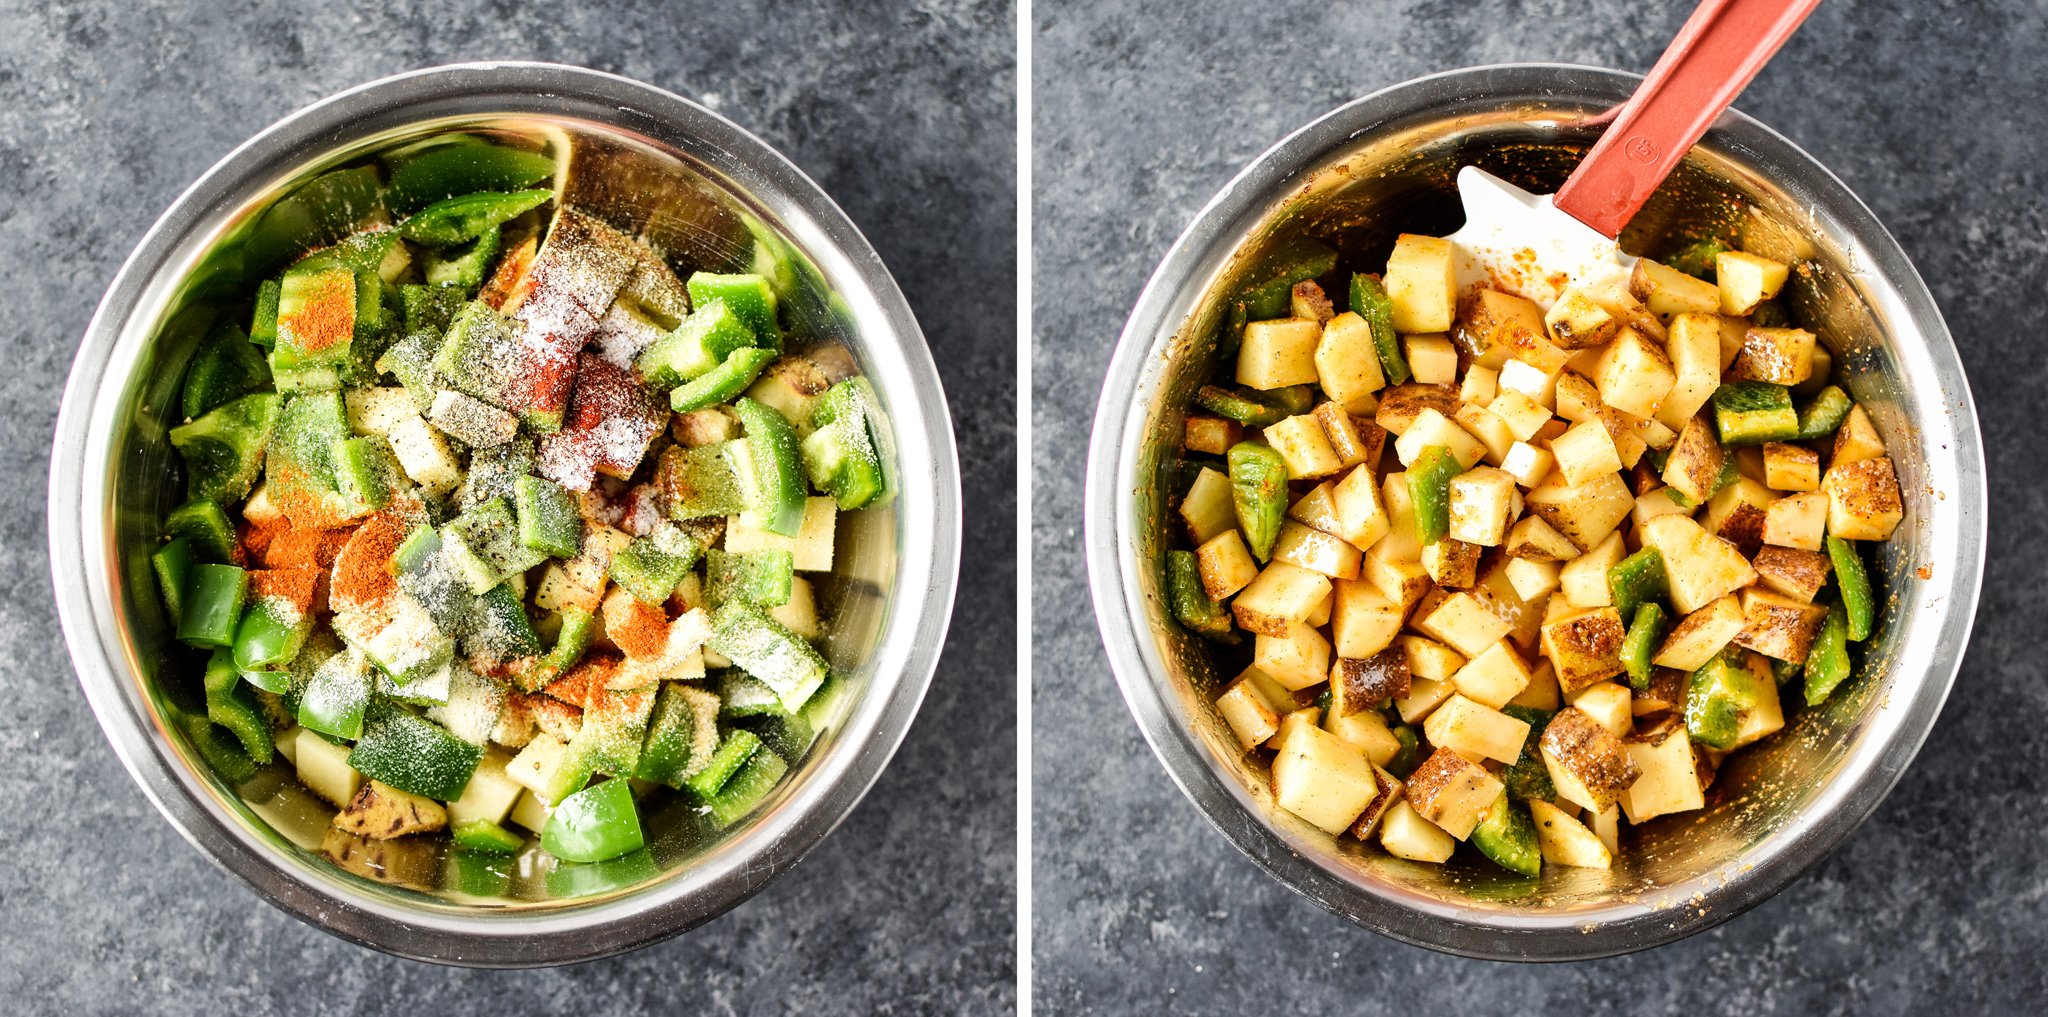 Left: A bowl of peppers and breakfast potatoes with seasonings on top. Right: The same bowl stirred up and ready to be cooked. 